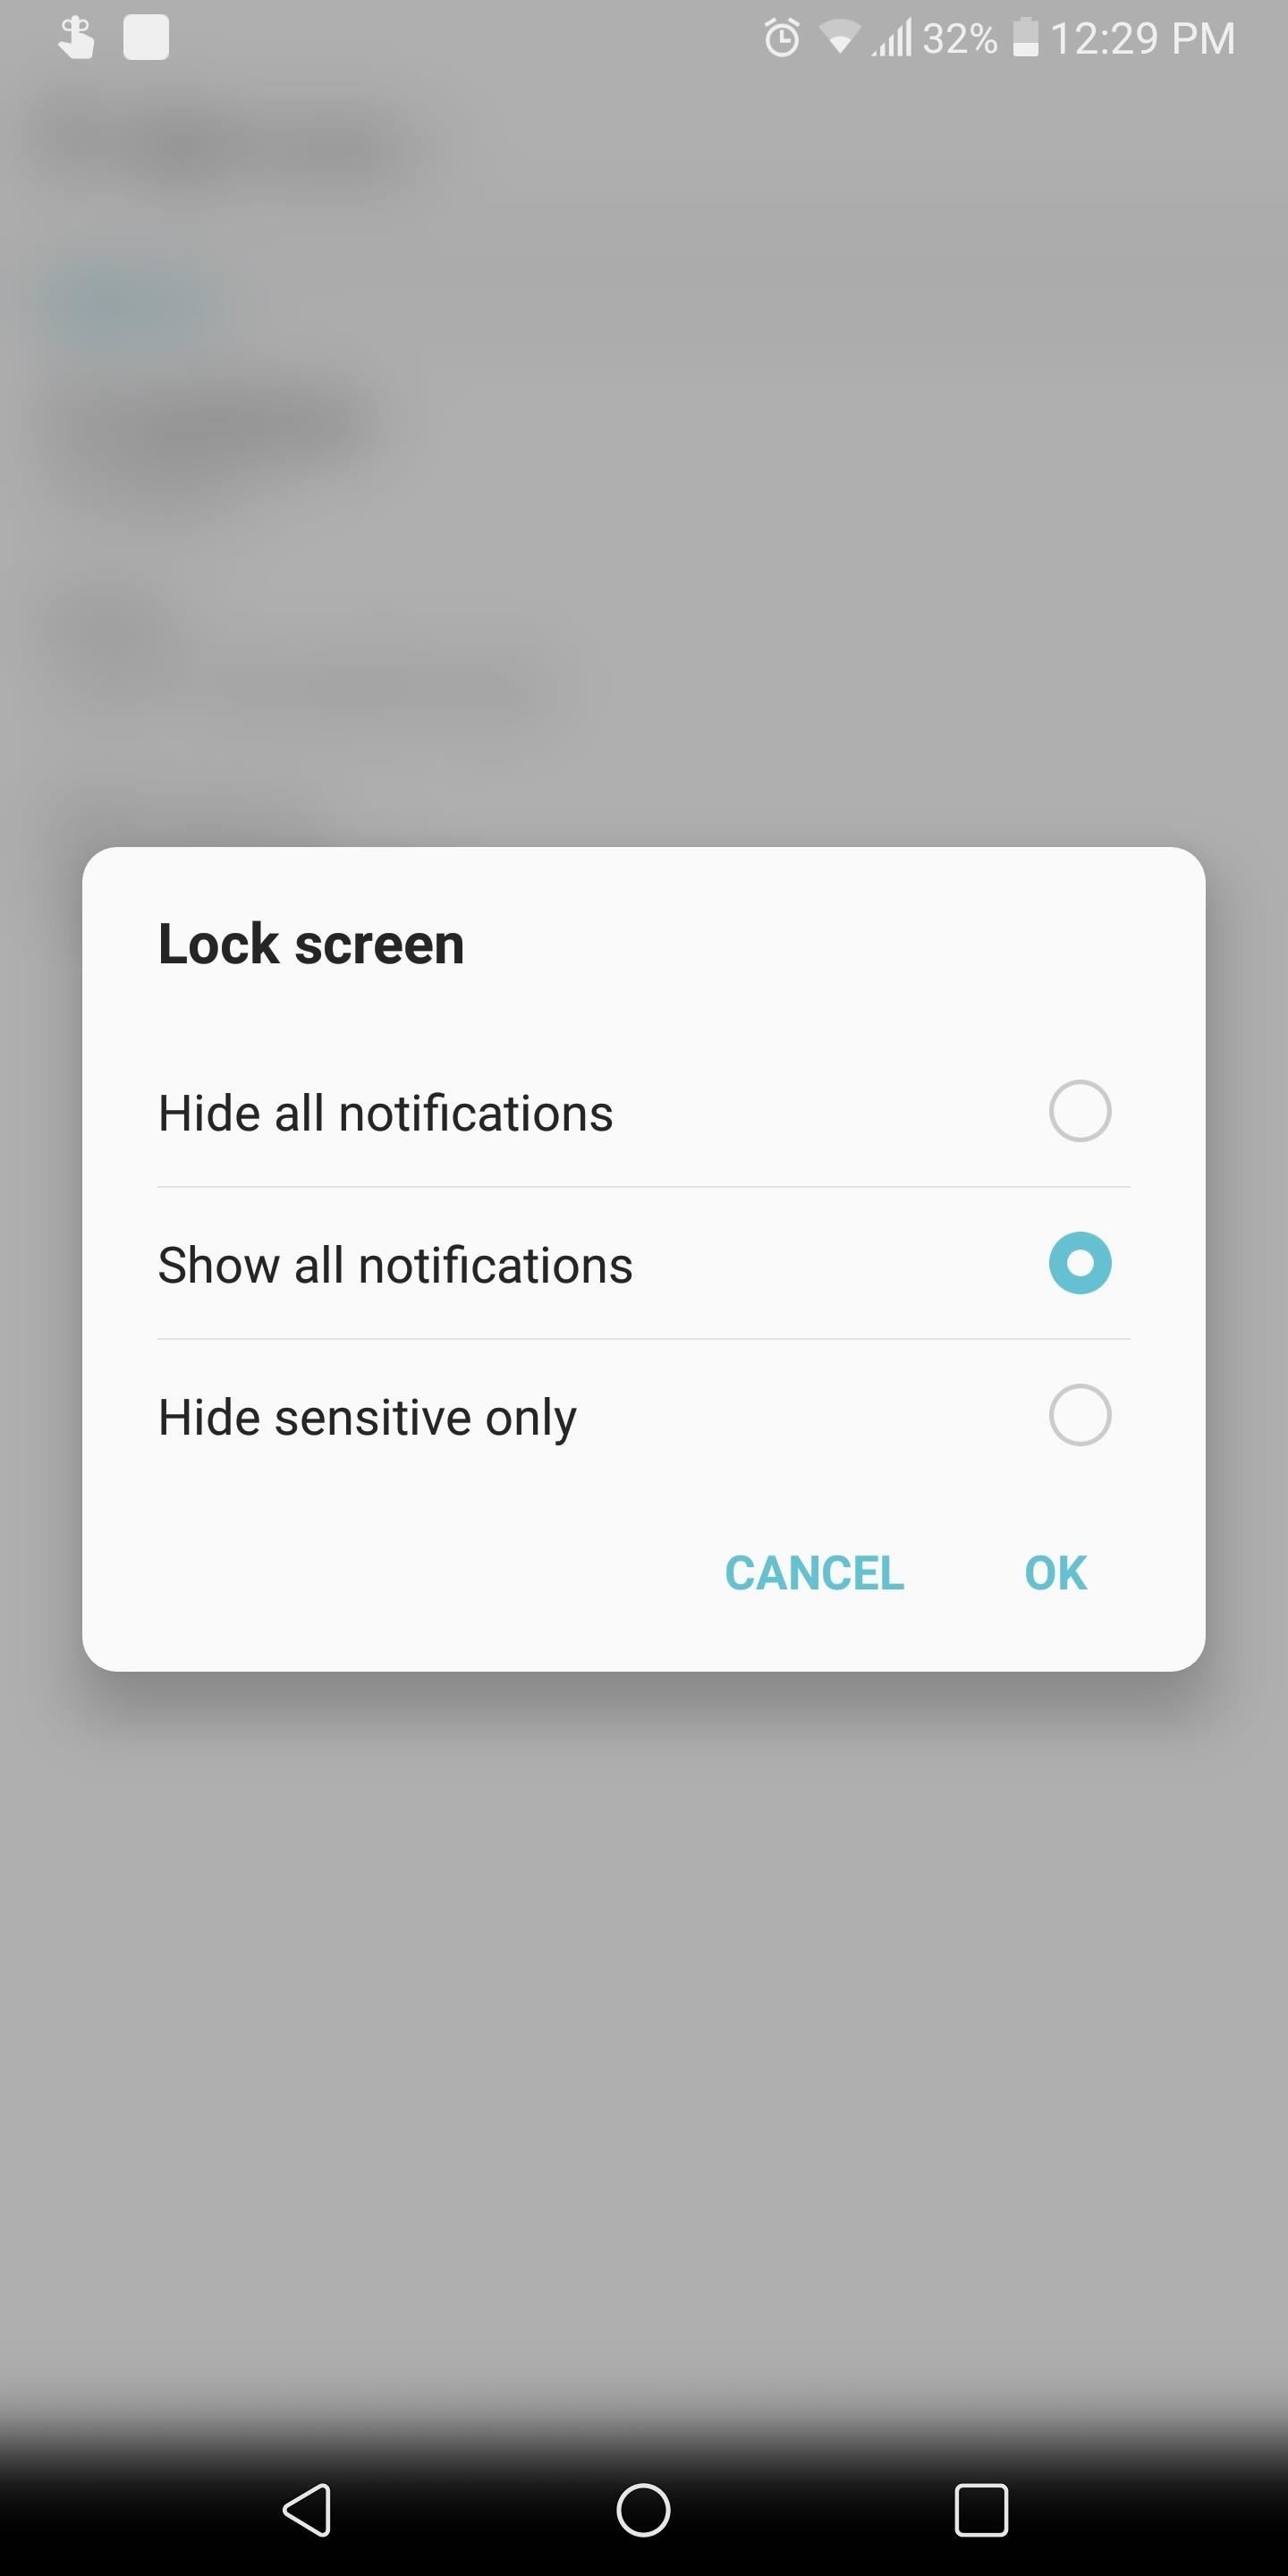 Change These Settings Now to Protect Your Data in Case Your Phone Is Stolen